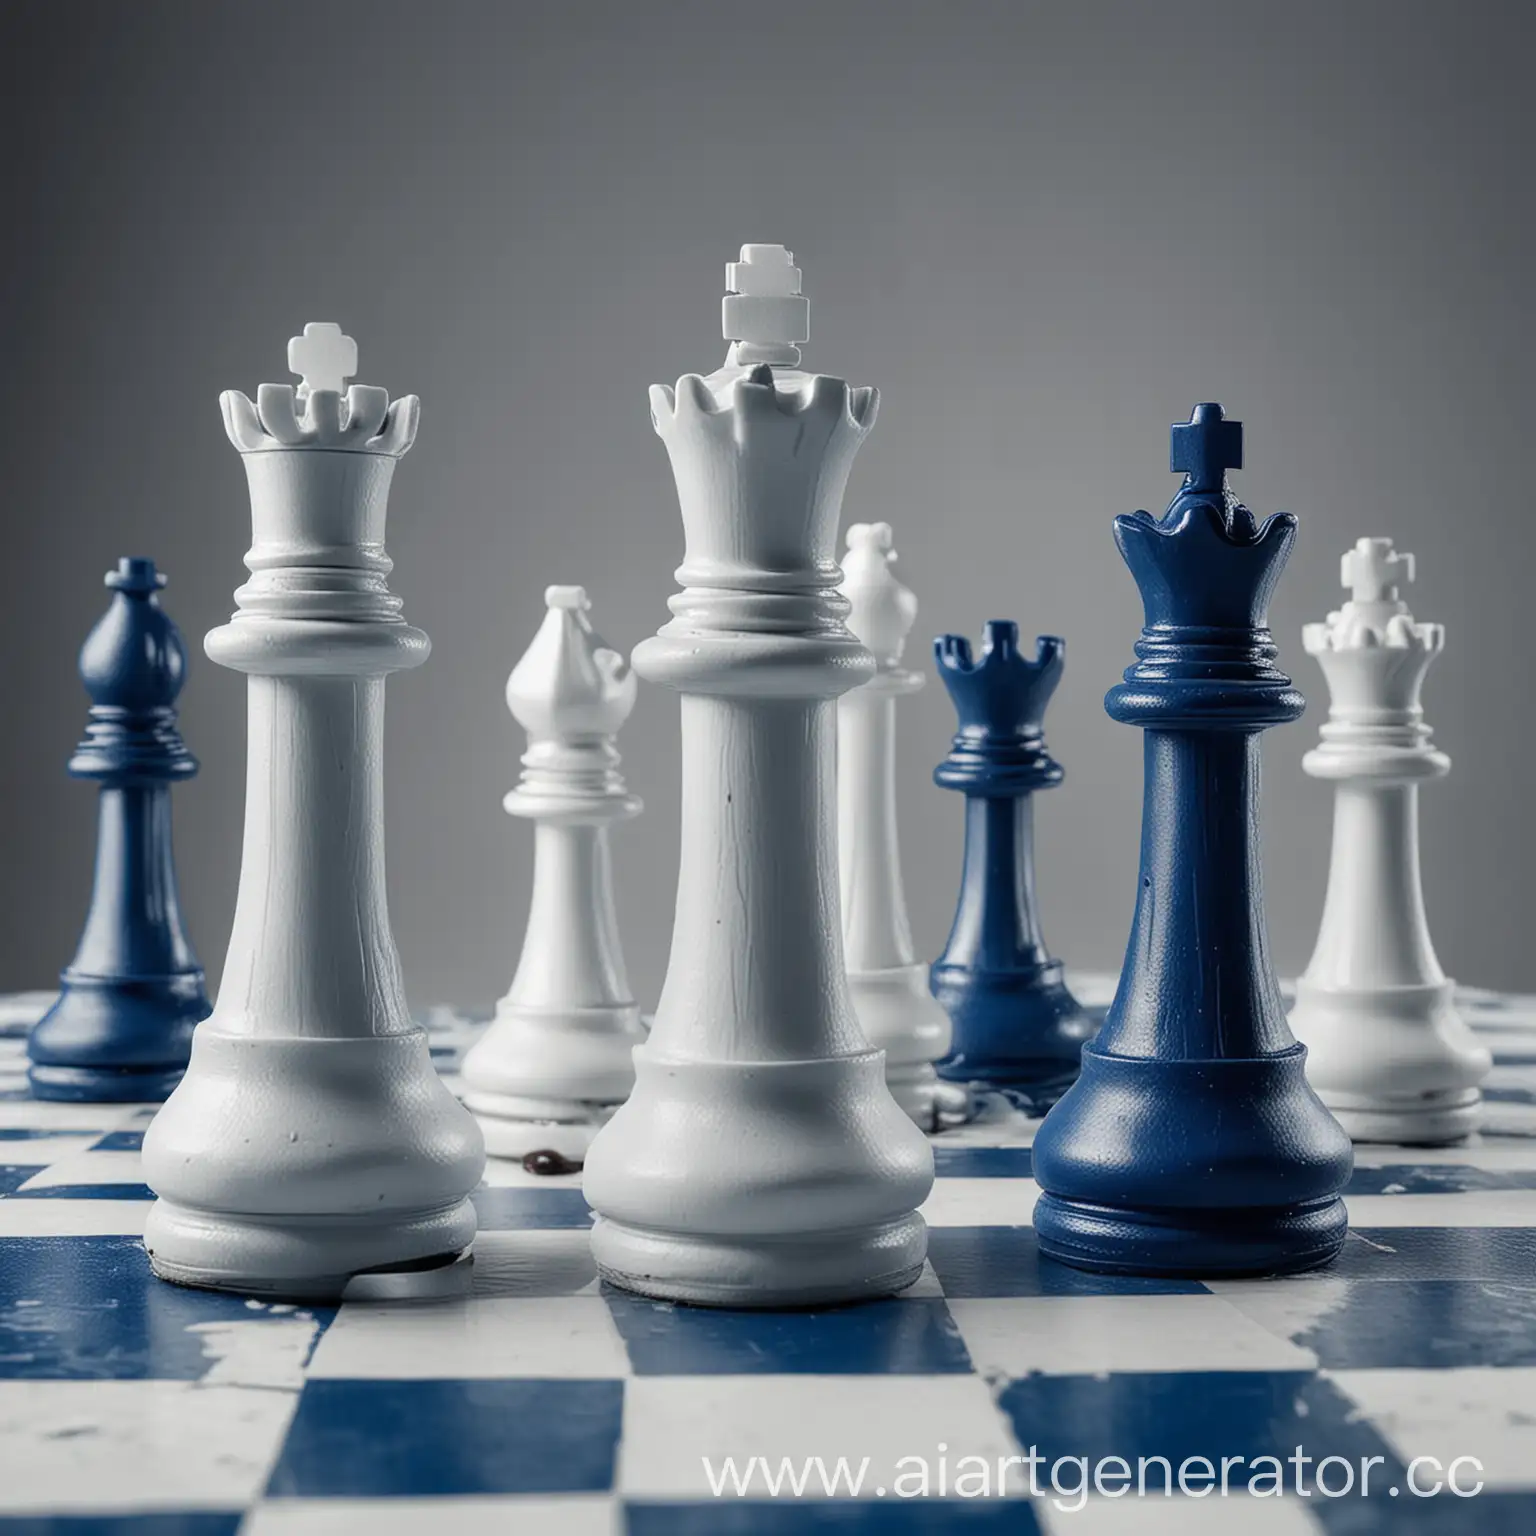 Intense-Chess-Battle-in-Striking-Blue-and-White-Color-Scheme